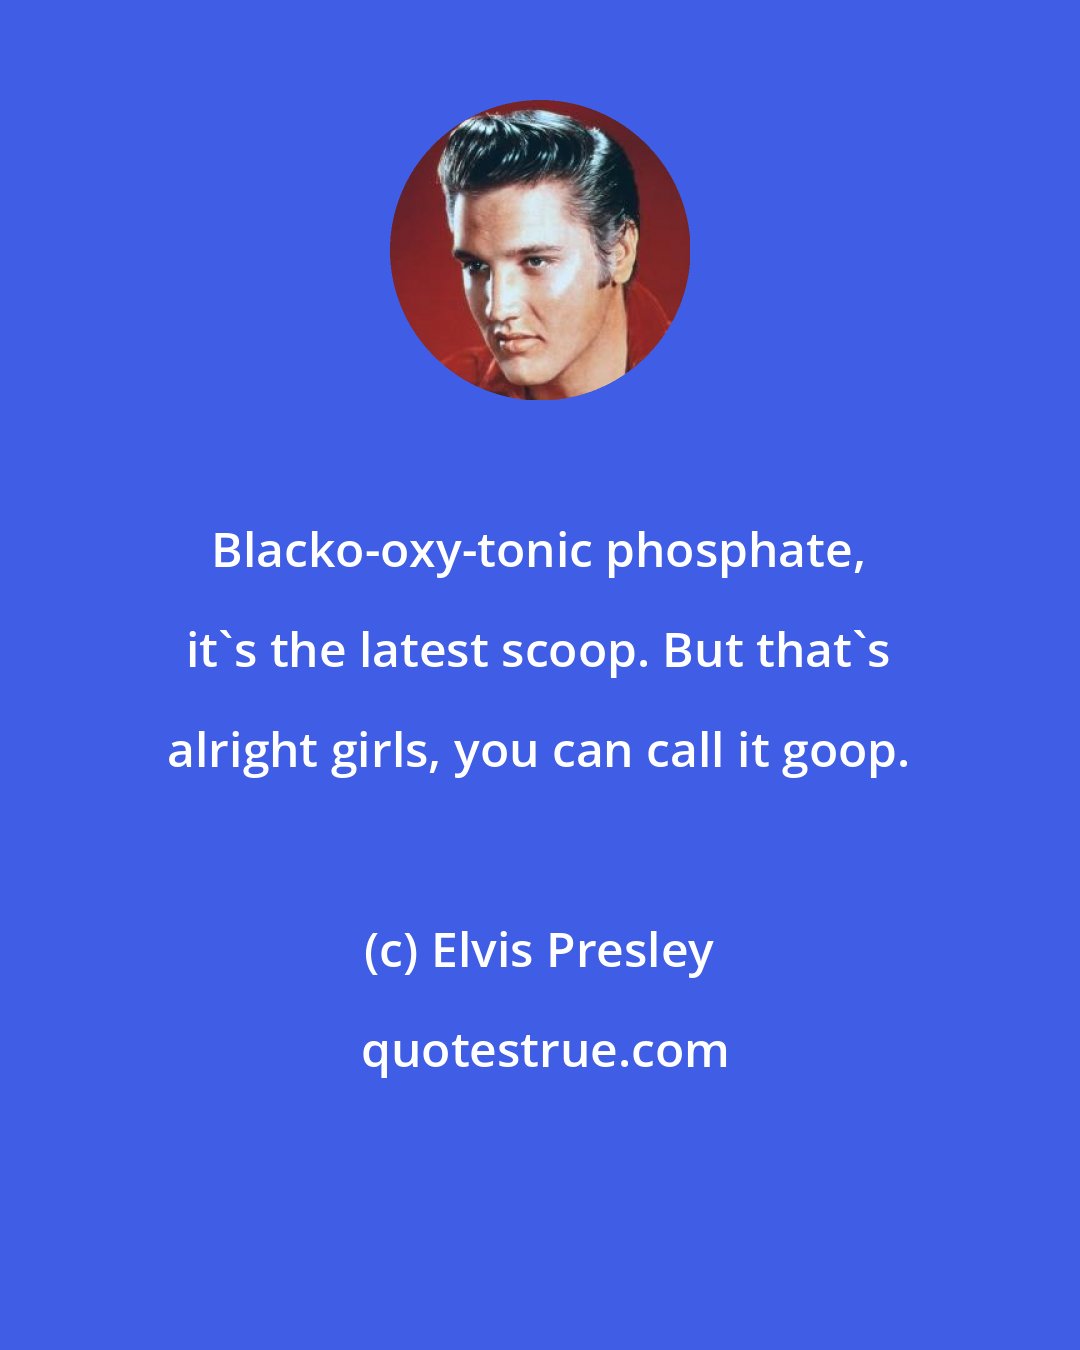 Elvis Presley: Blacko-oxy-tonic phosphate, it's the latest scoop. But that's alright girls, you can call it goop.